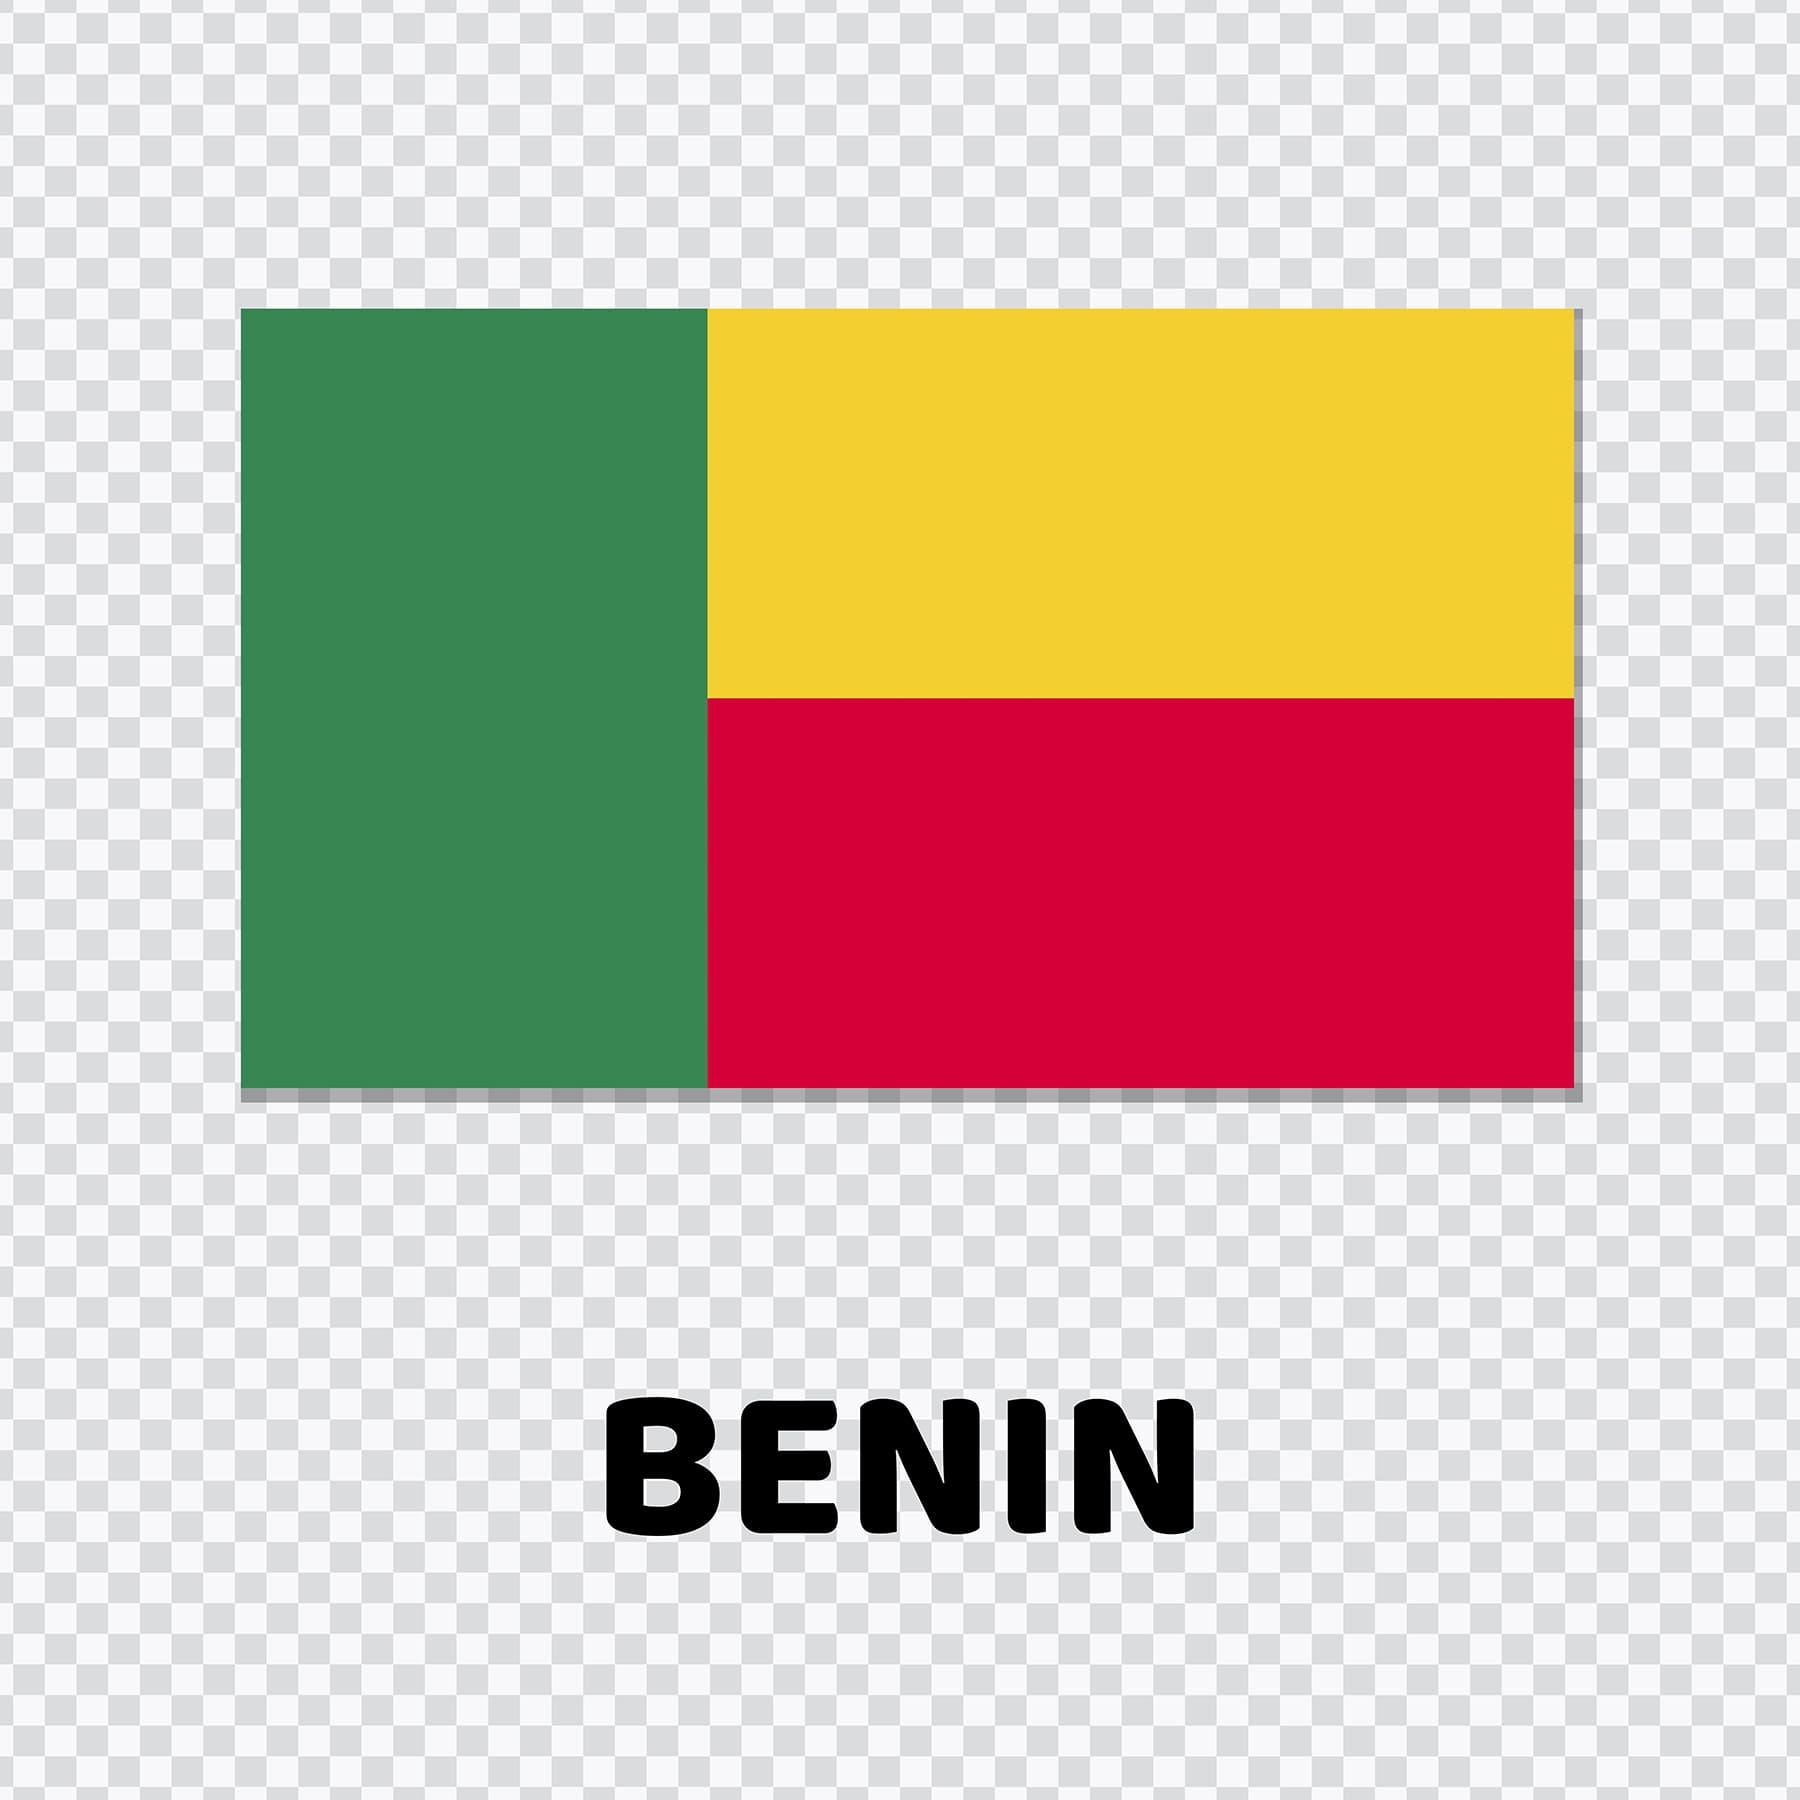 Benin Country flag vector graphics for free download in ai, eps10 and svg format